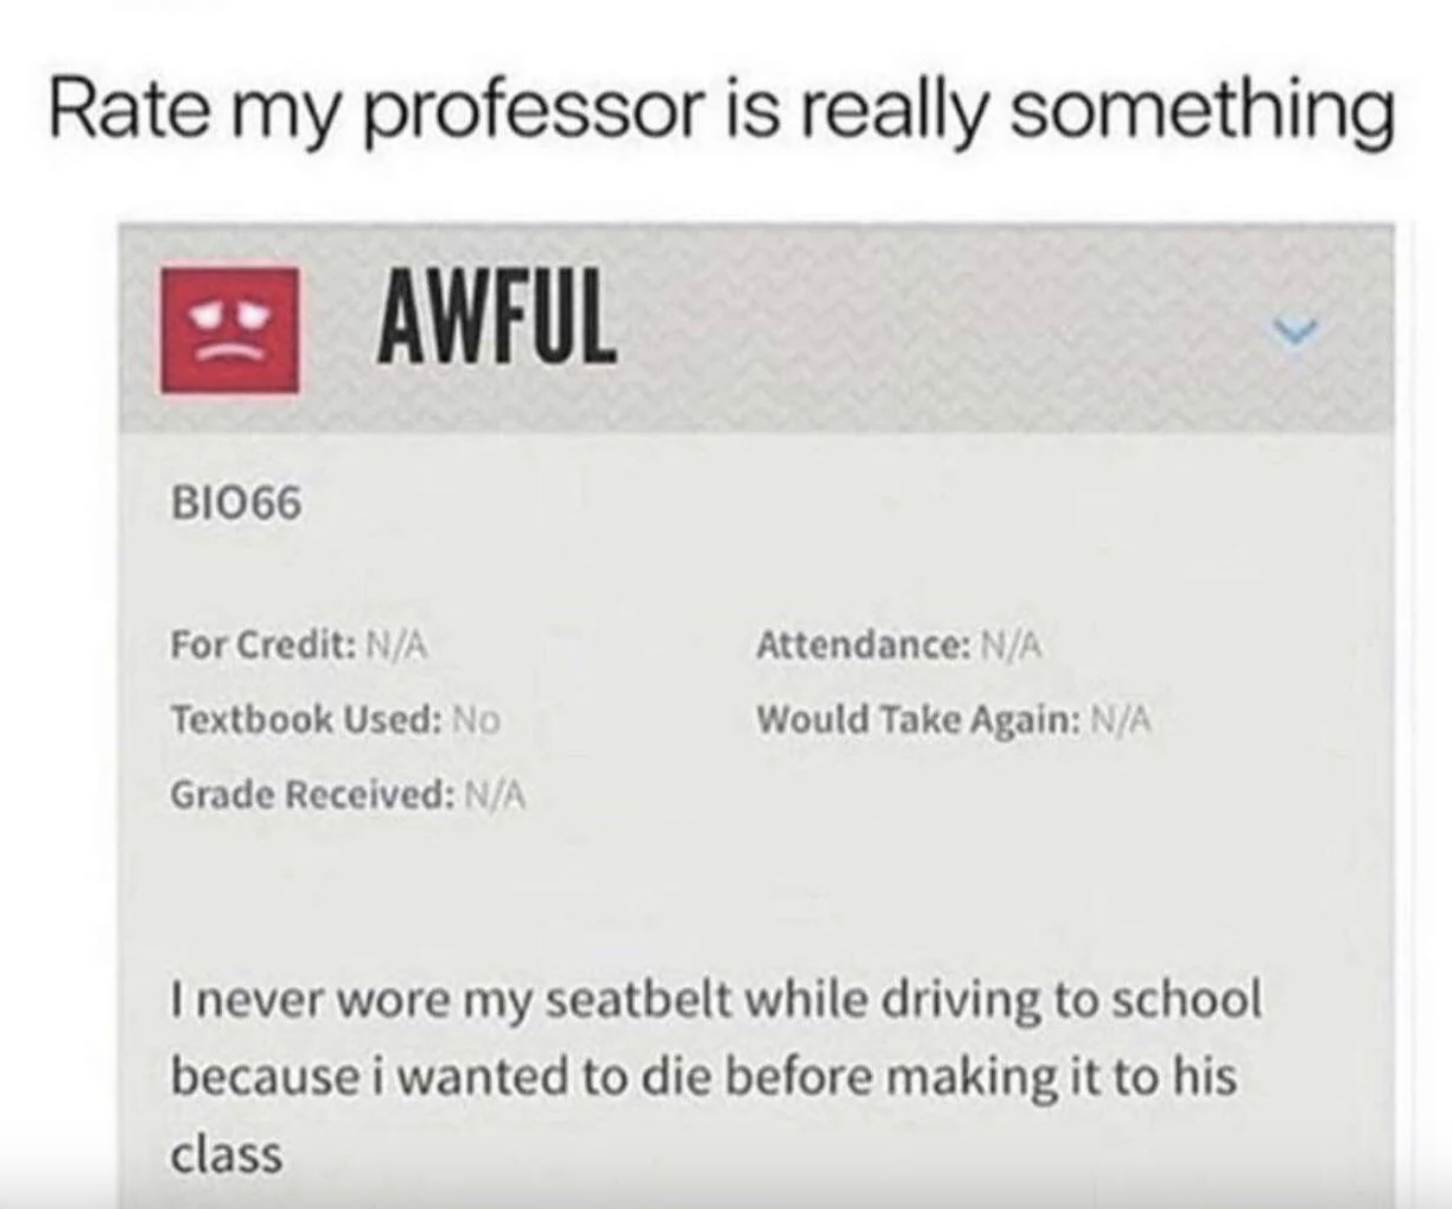 ii never wore my seatbelt while driving to school because i wanted to die before making it to his class